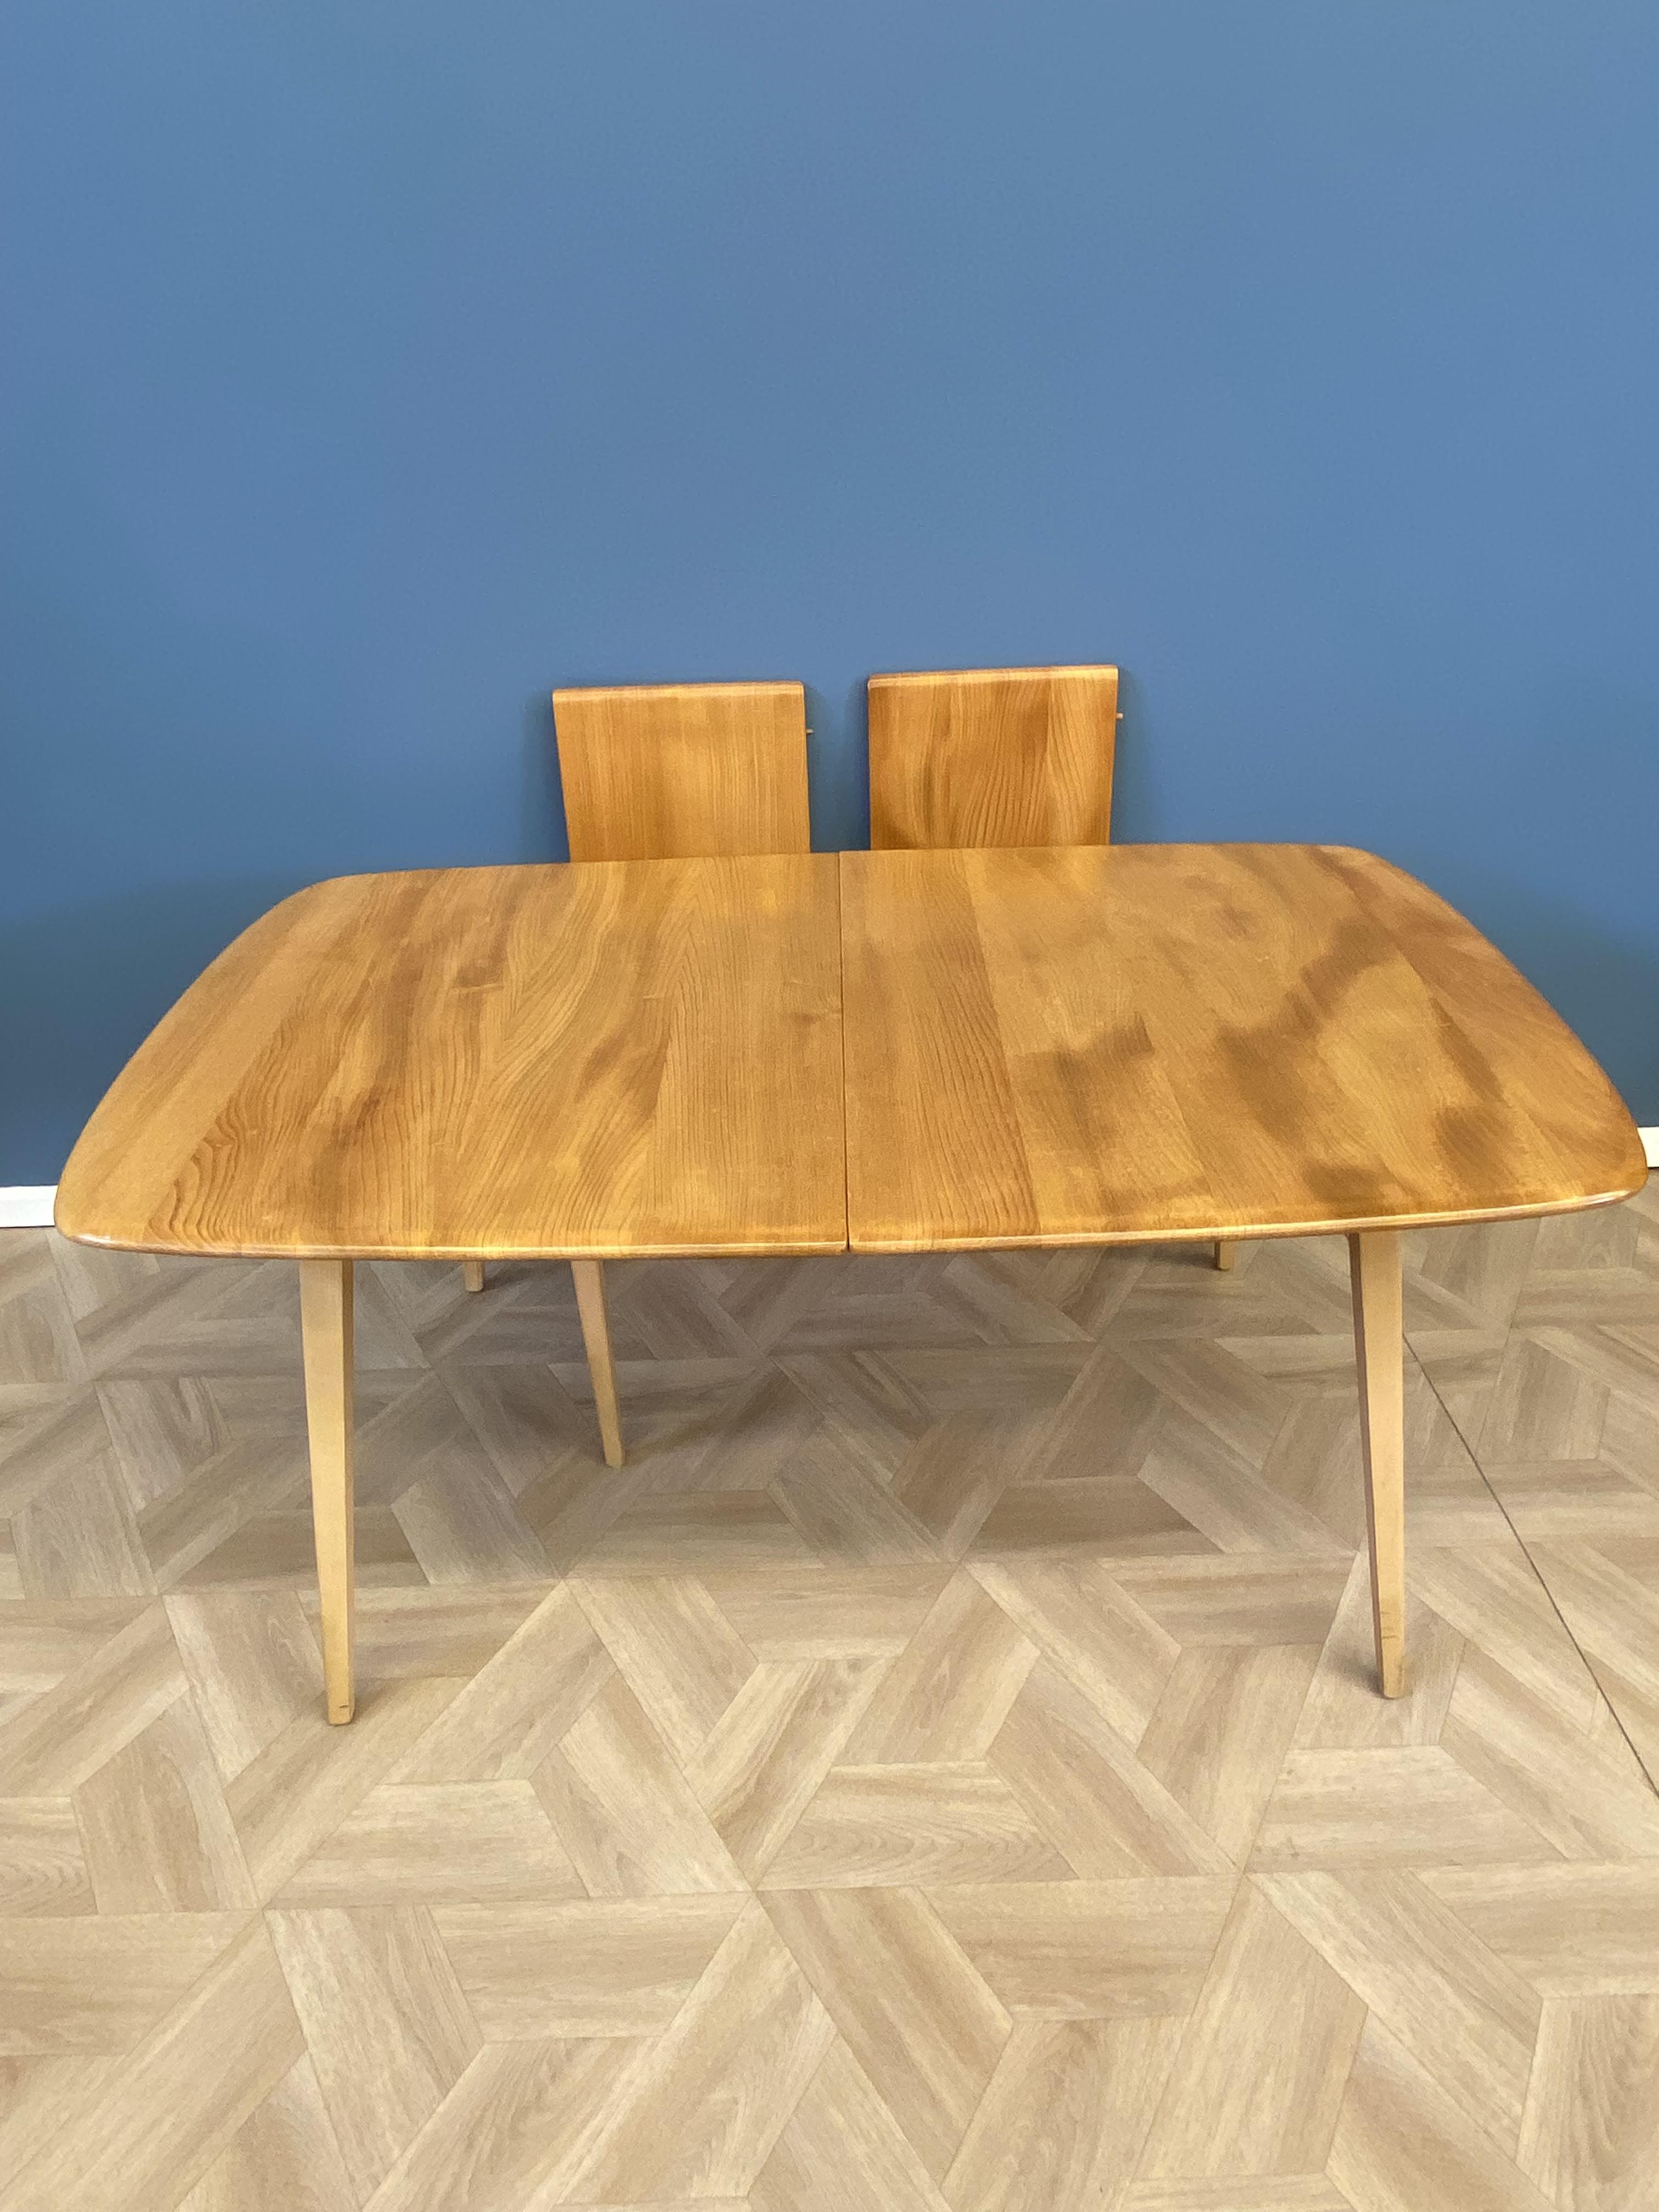 Ercol extending dining table - Image 7 of 9